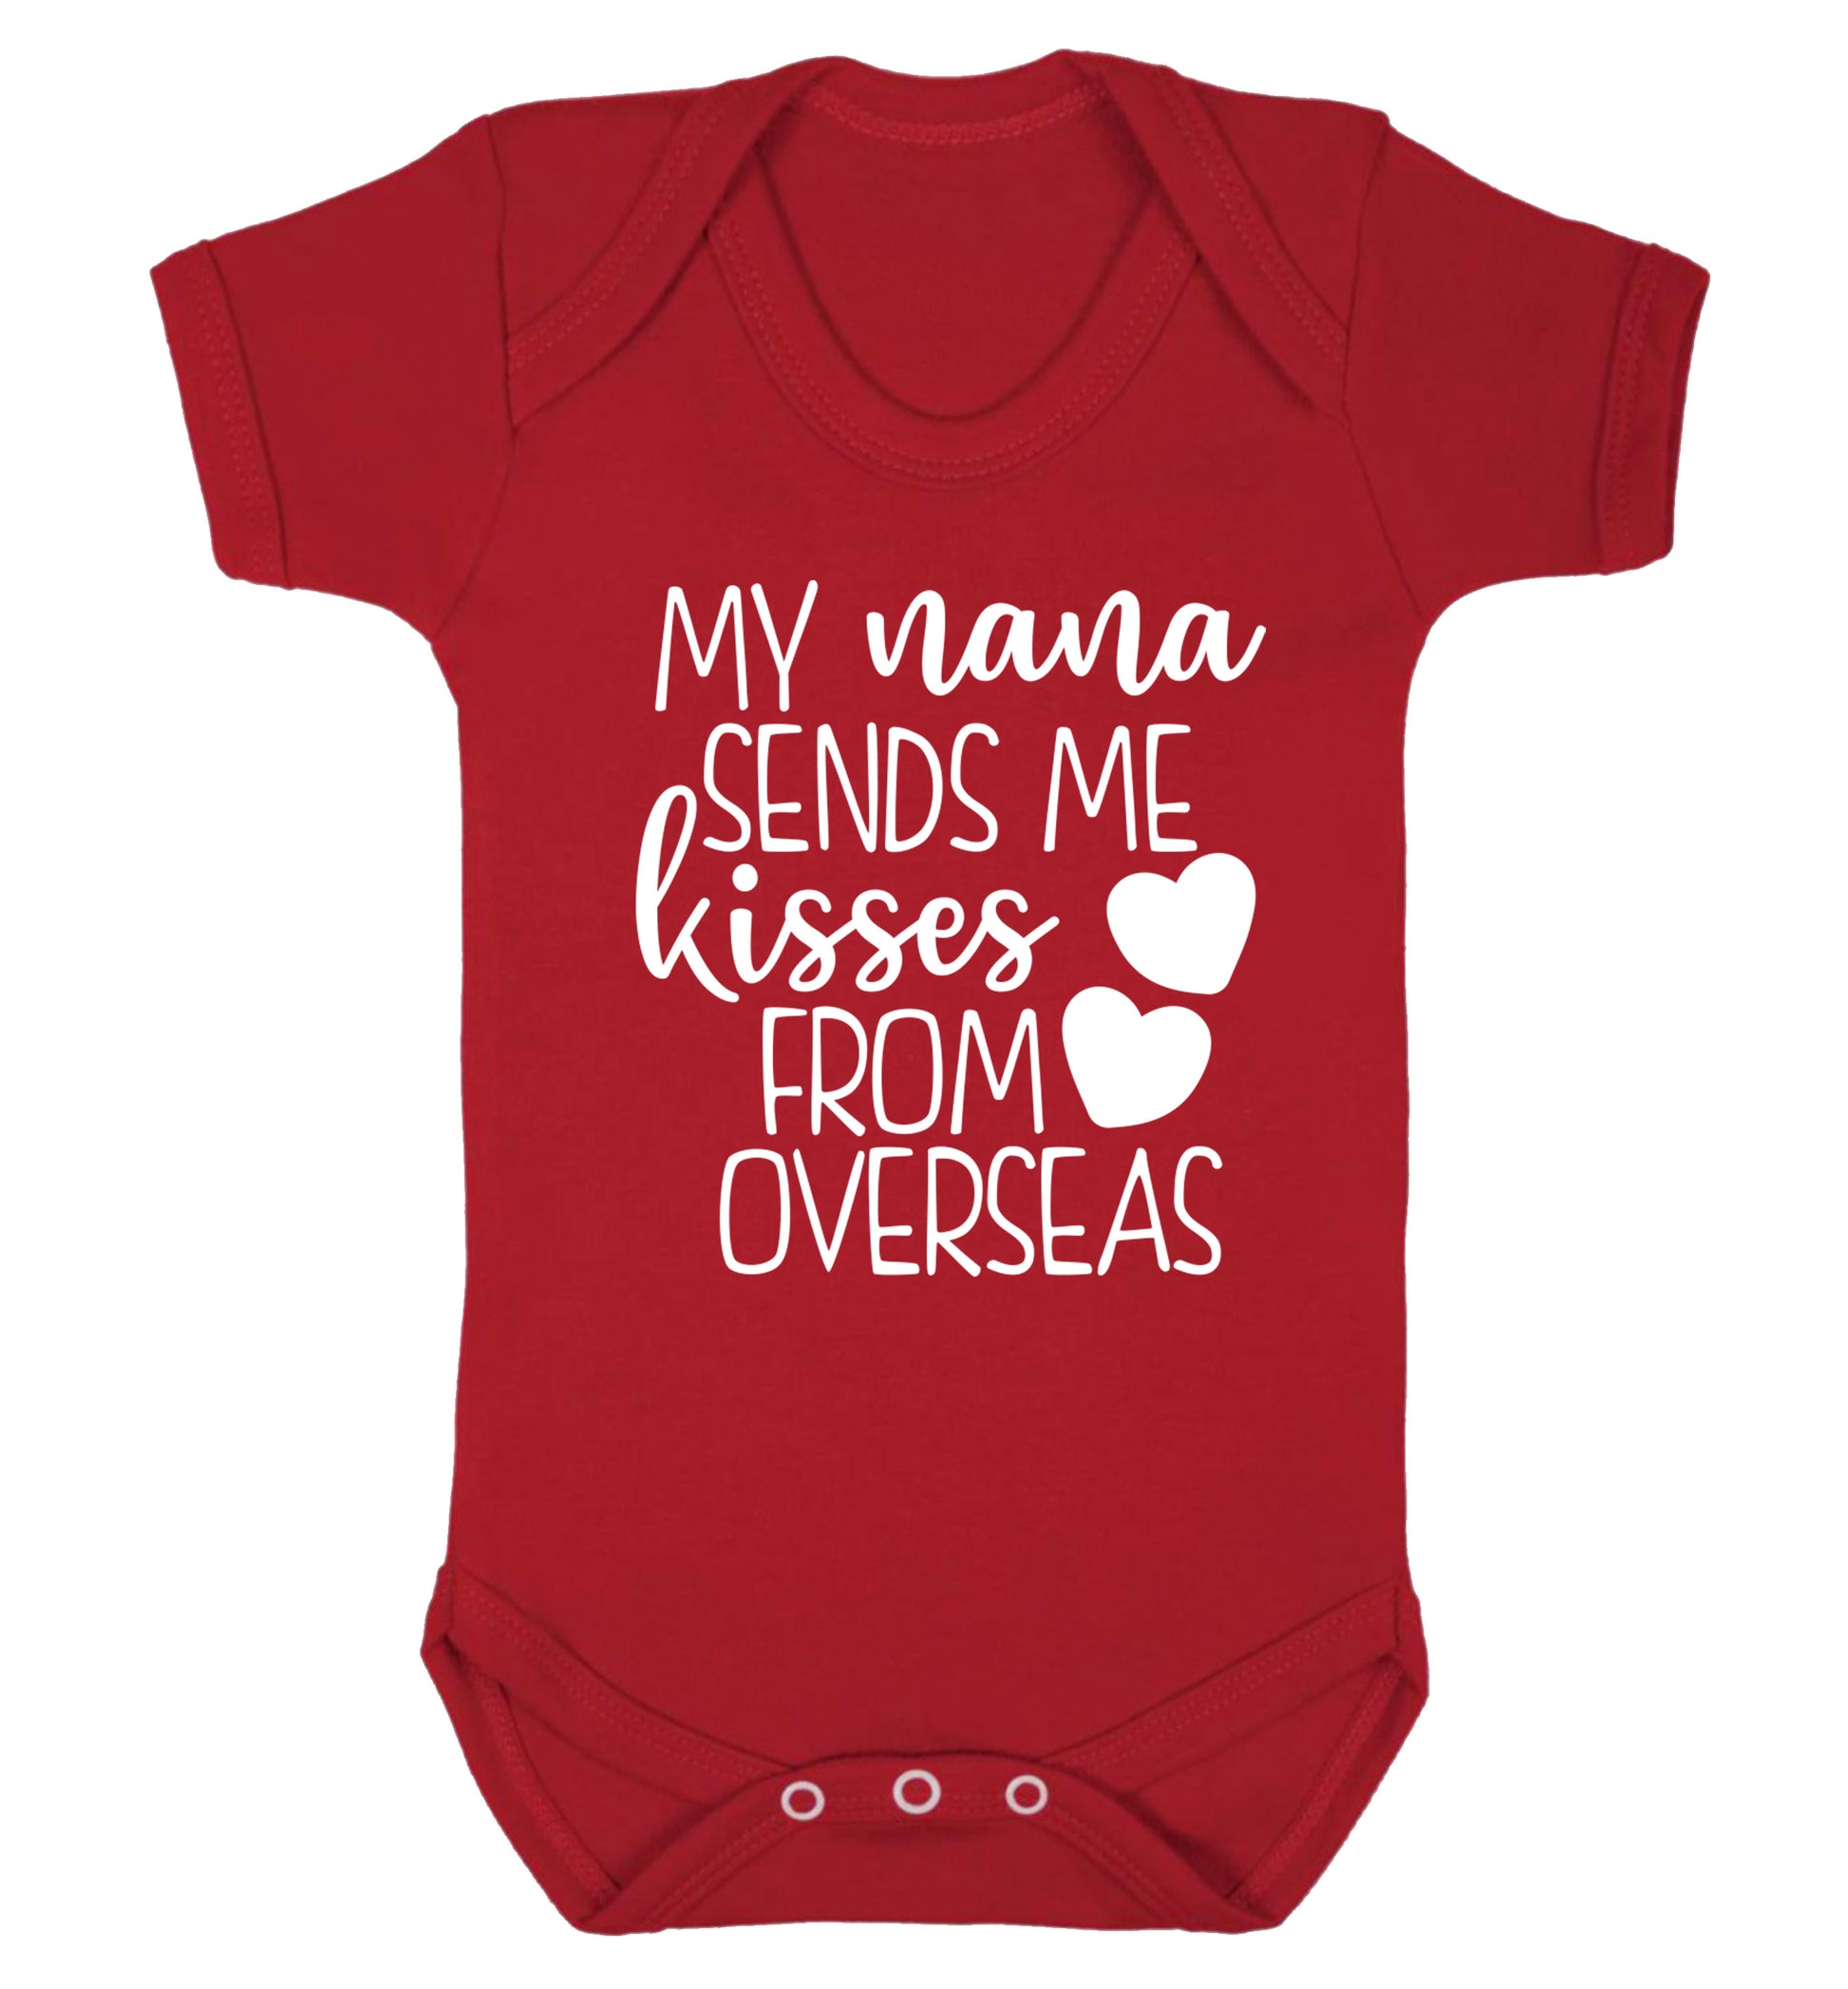 My nana sends me kisses from overseas Baby Vest red 18-24 months